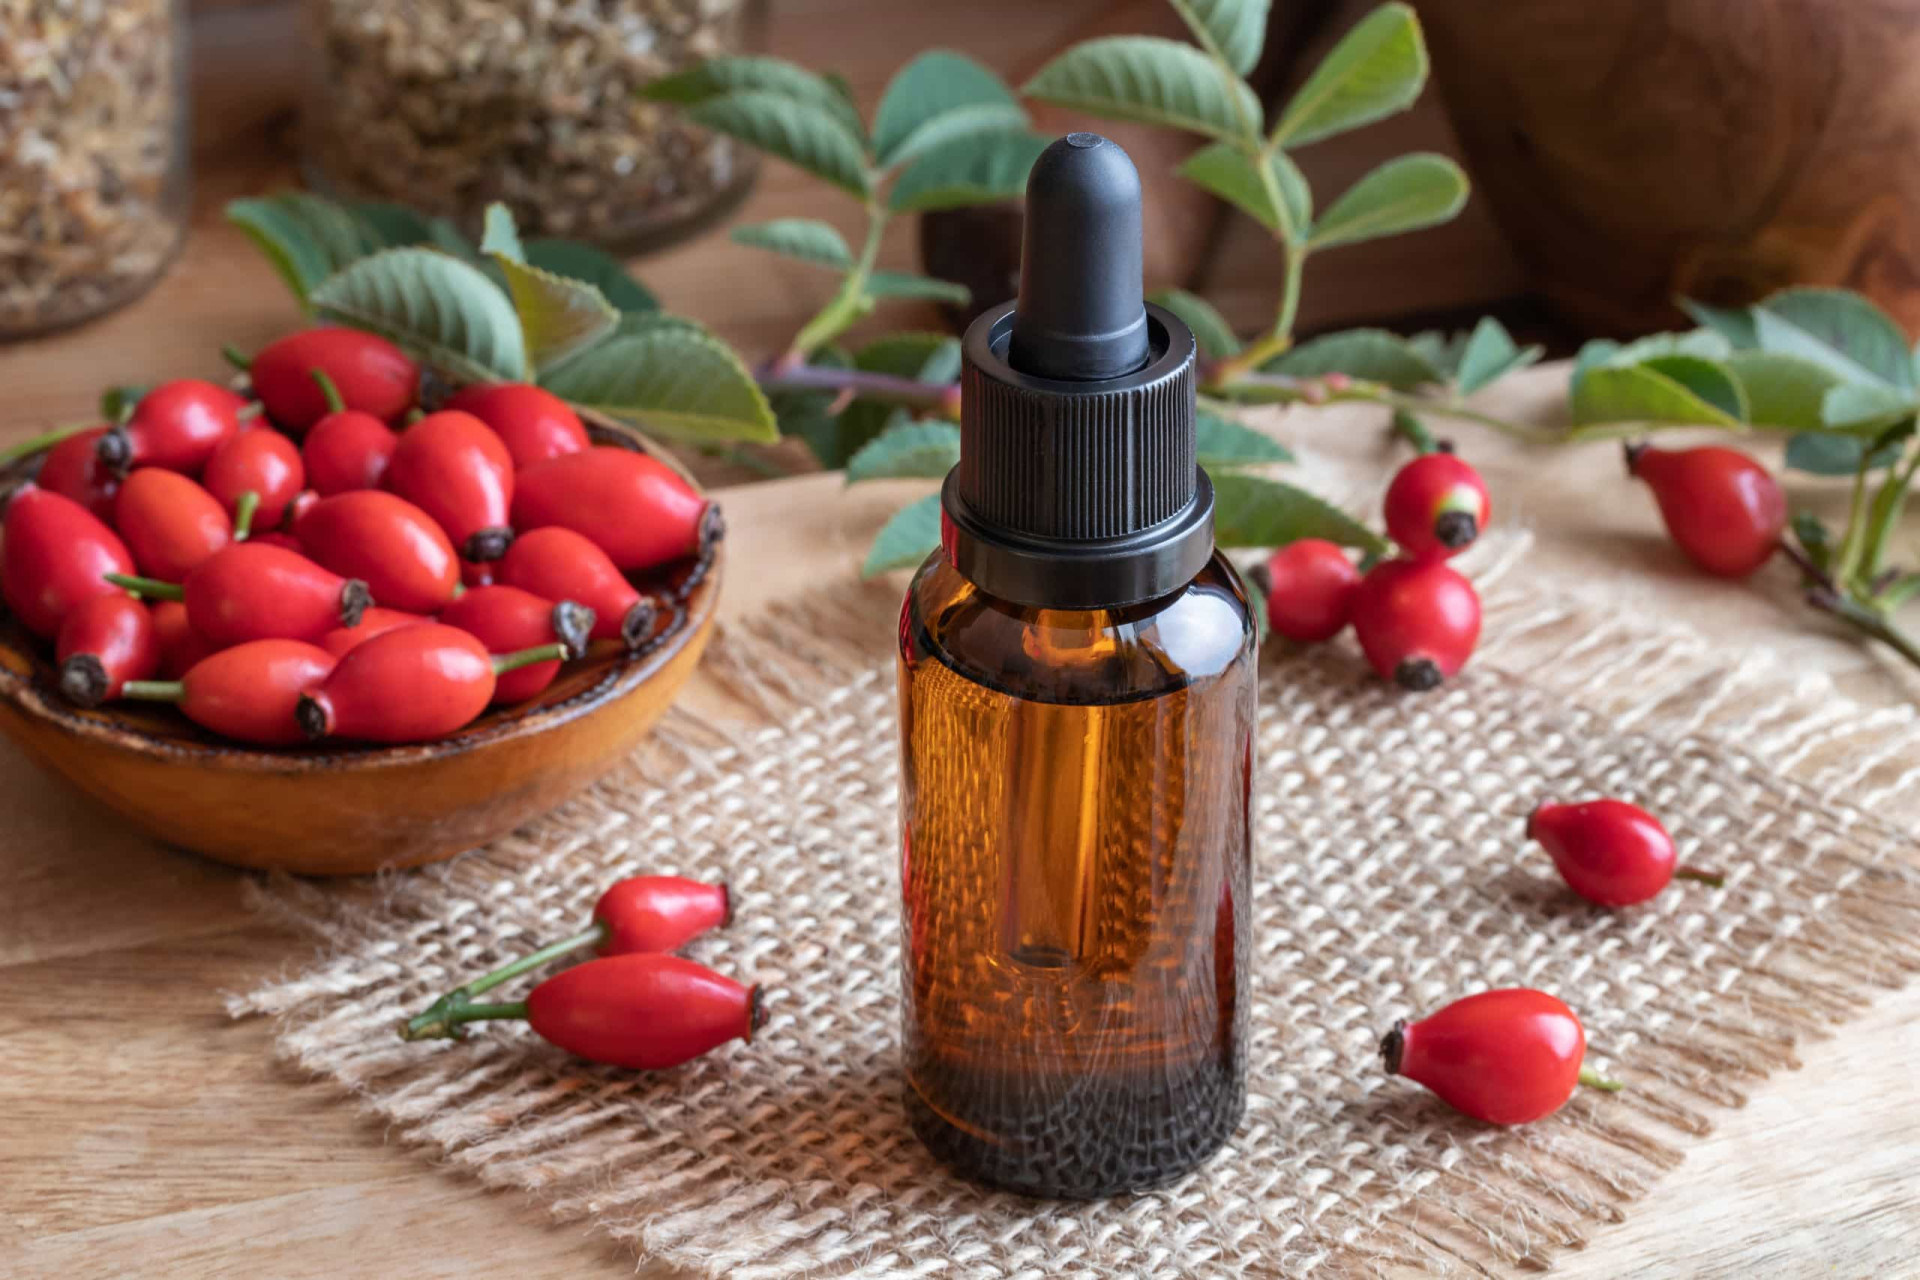 How rose hip oil benefits your face and skin